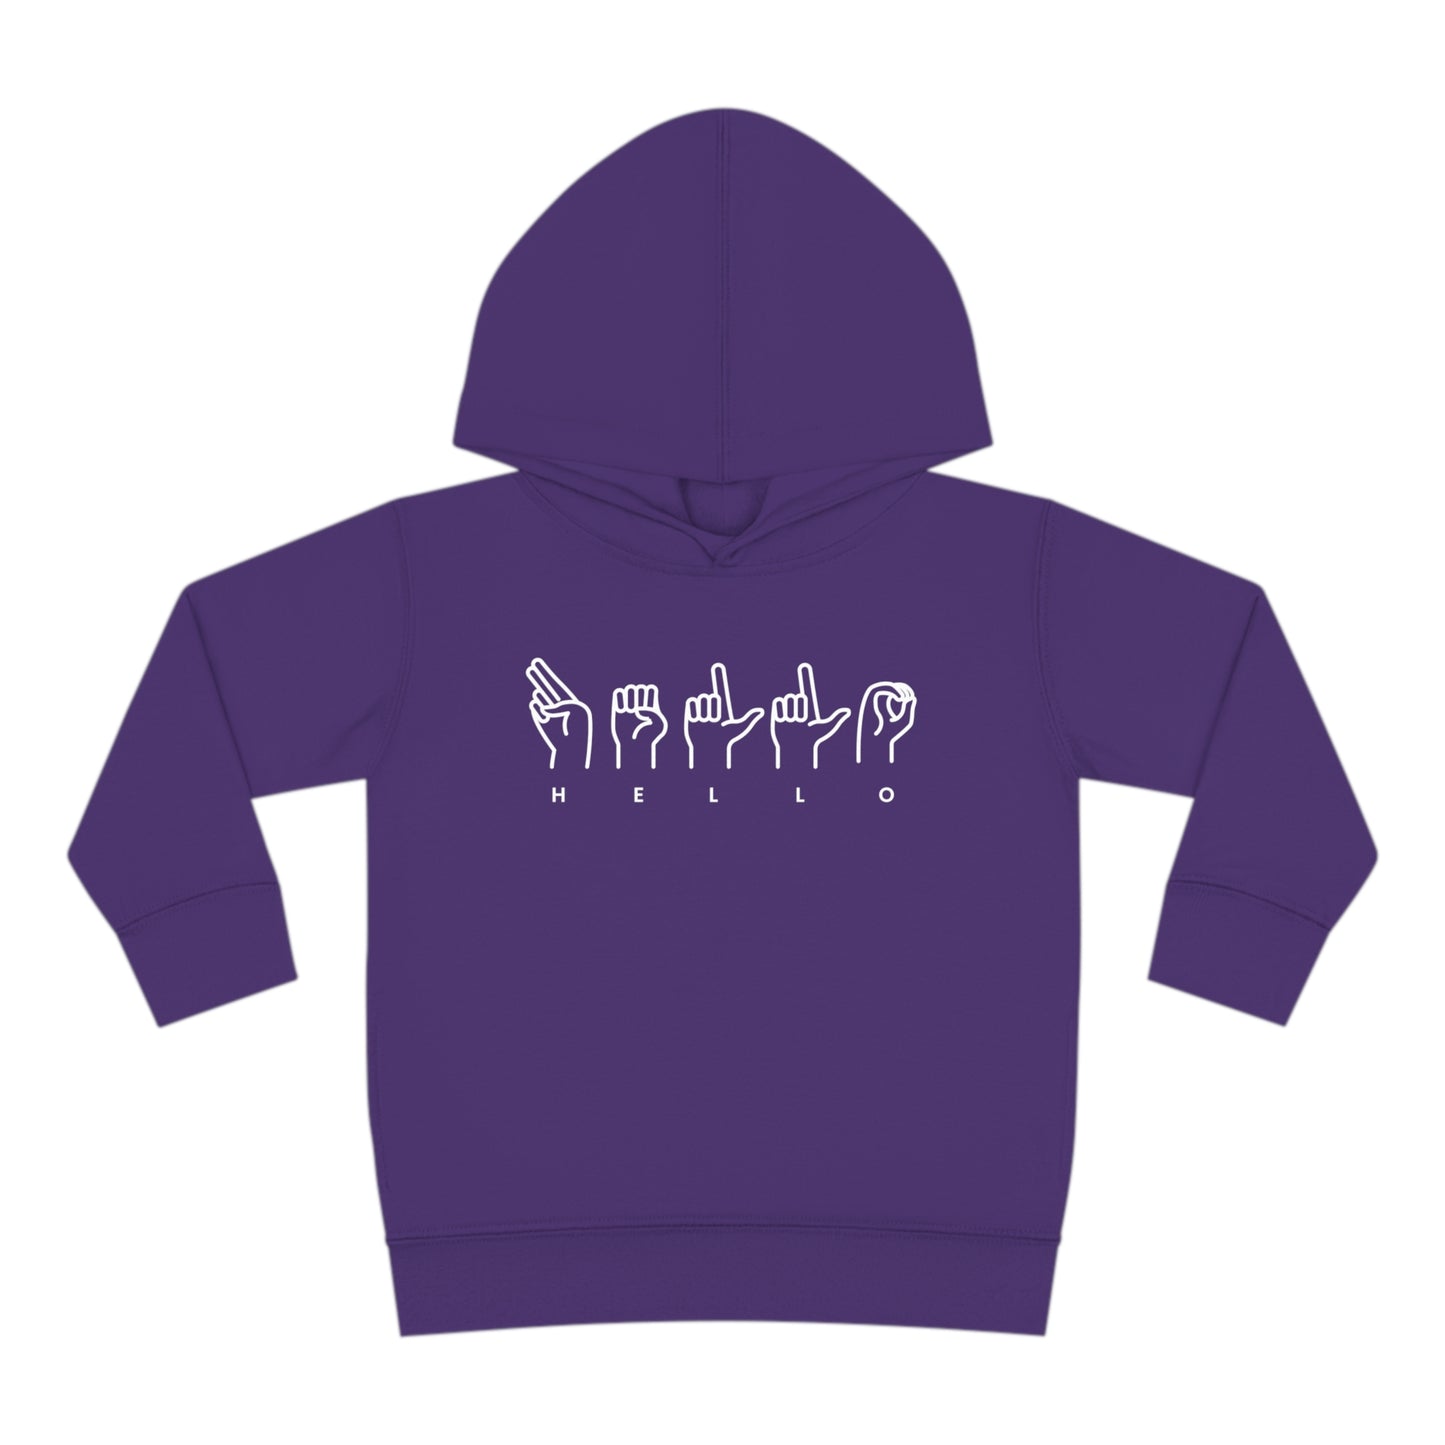 Toddler HELLO Hoodie